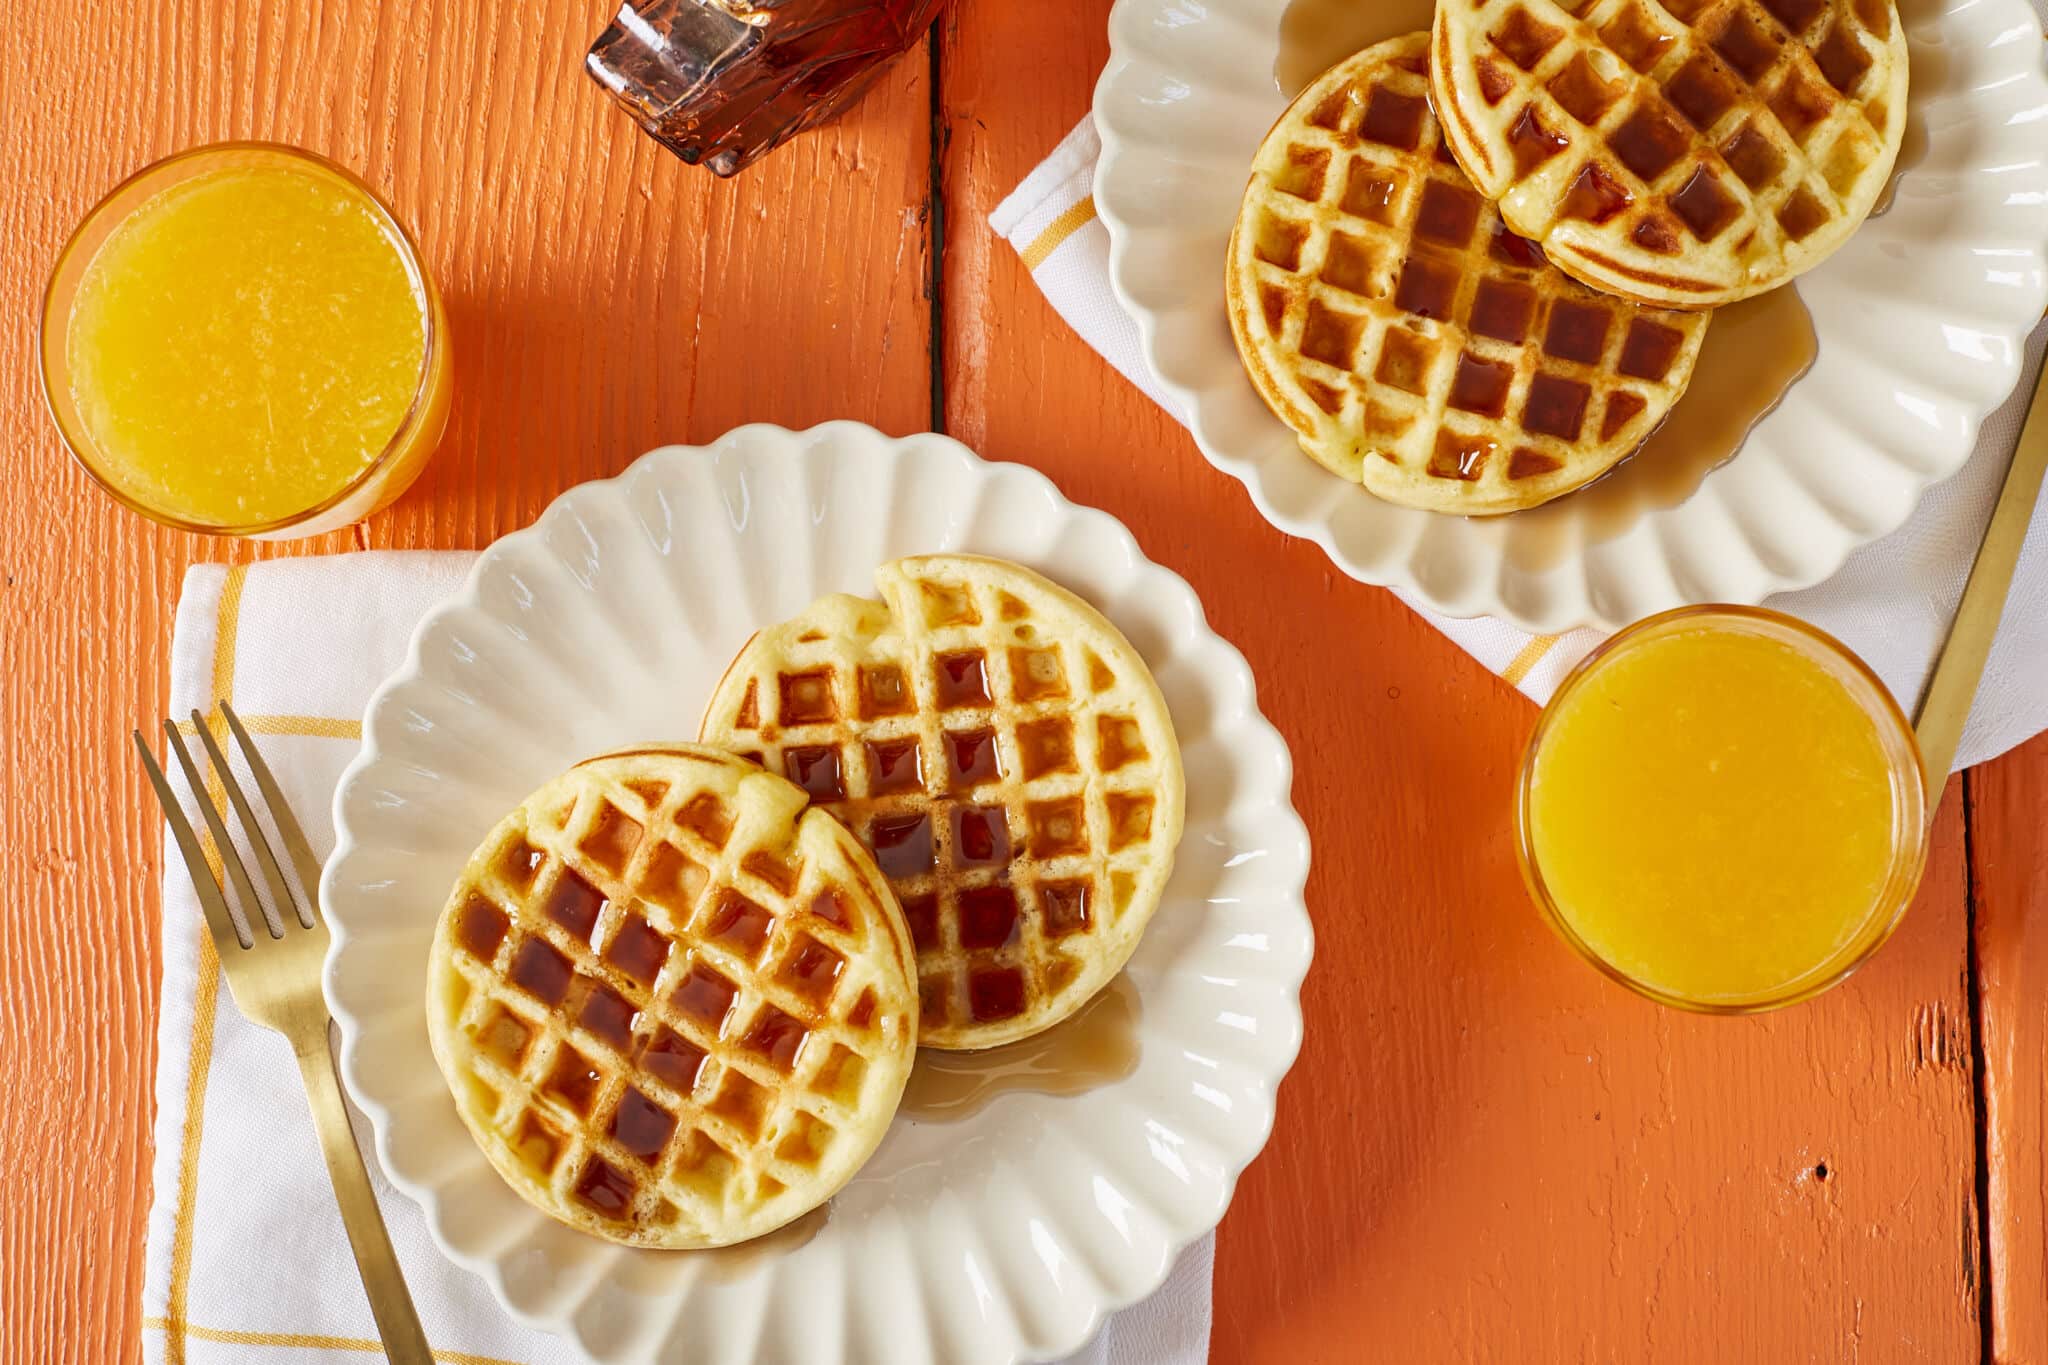 Four Homemade Eggo waffles are served with two on each white plate. The waffles are golden with crispy edges and tender interior, drizzled with maple syrup and paired with a glass of orange juice on the side.